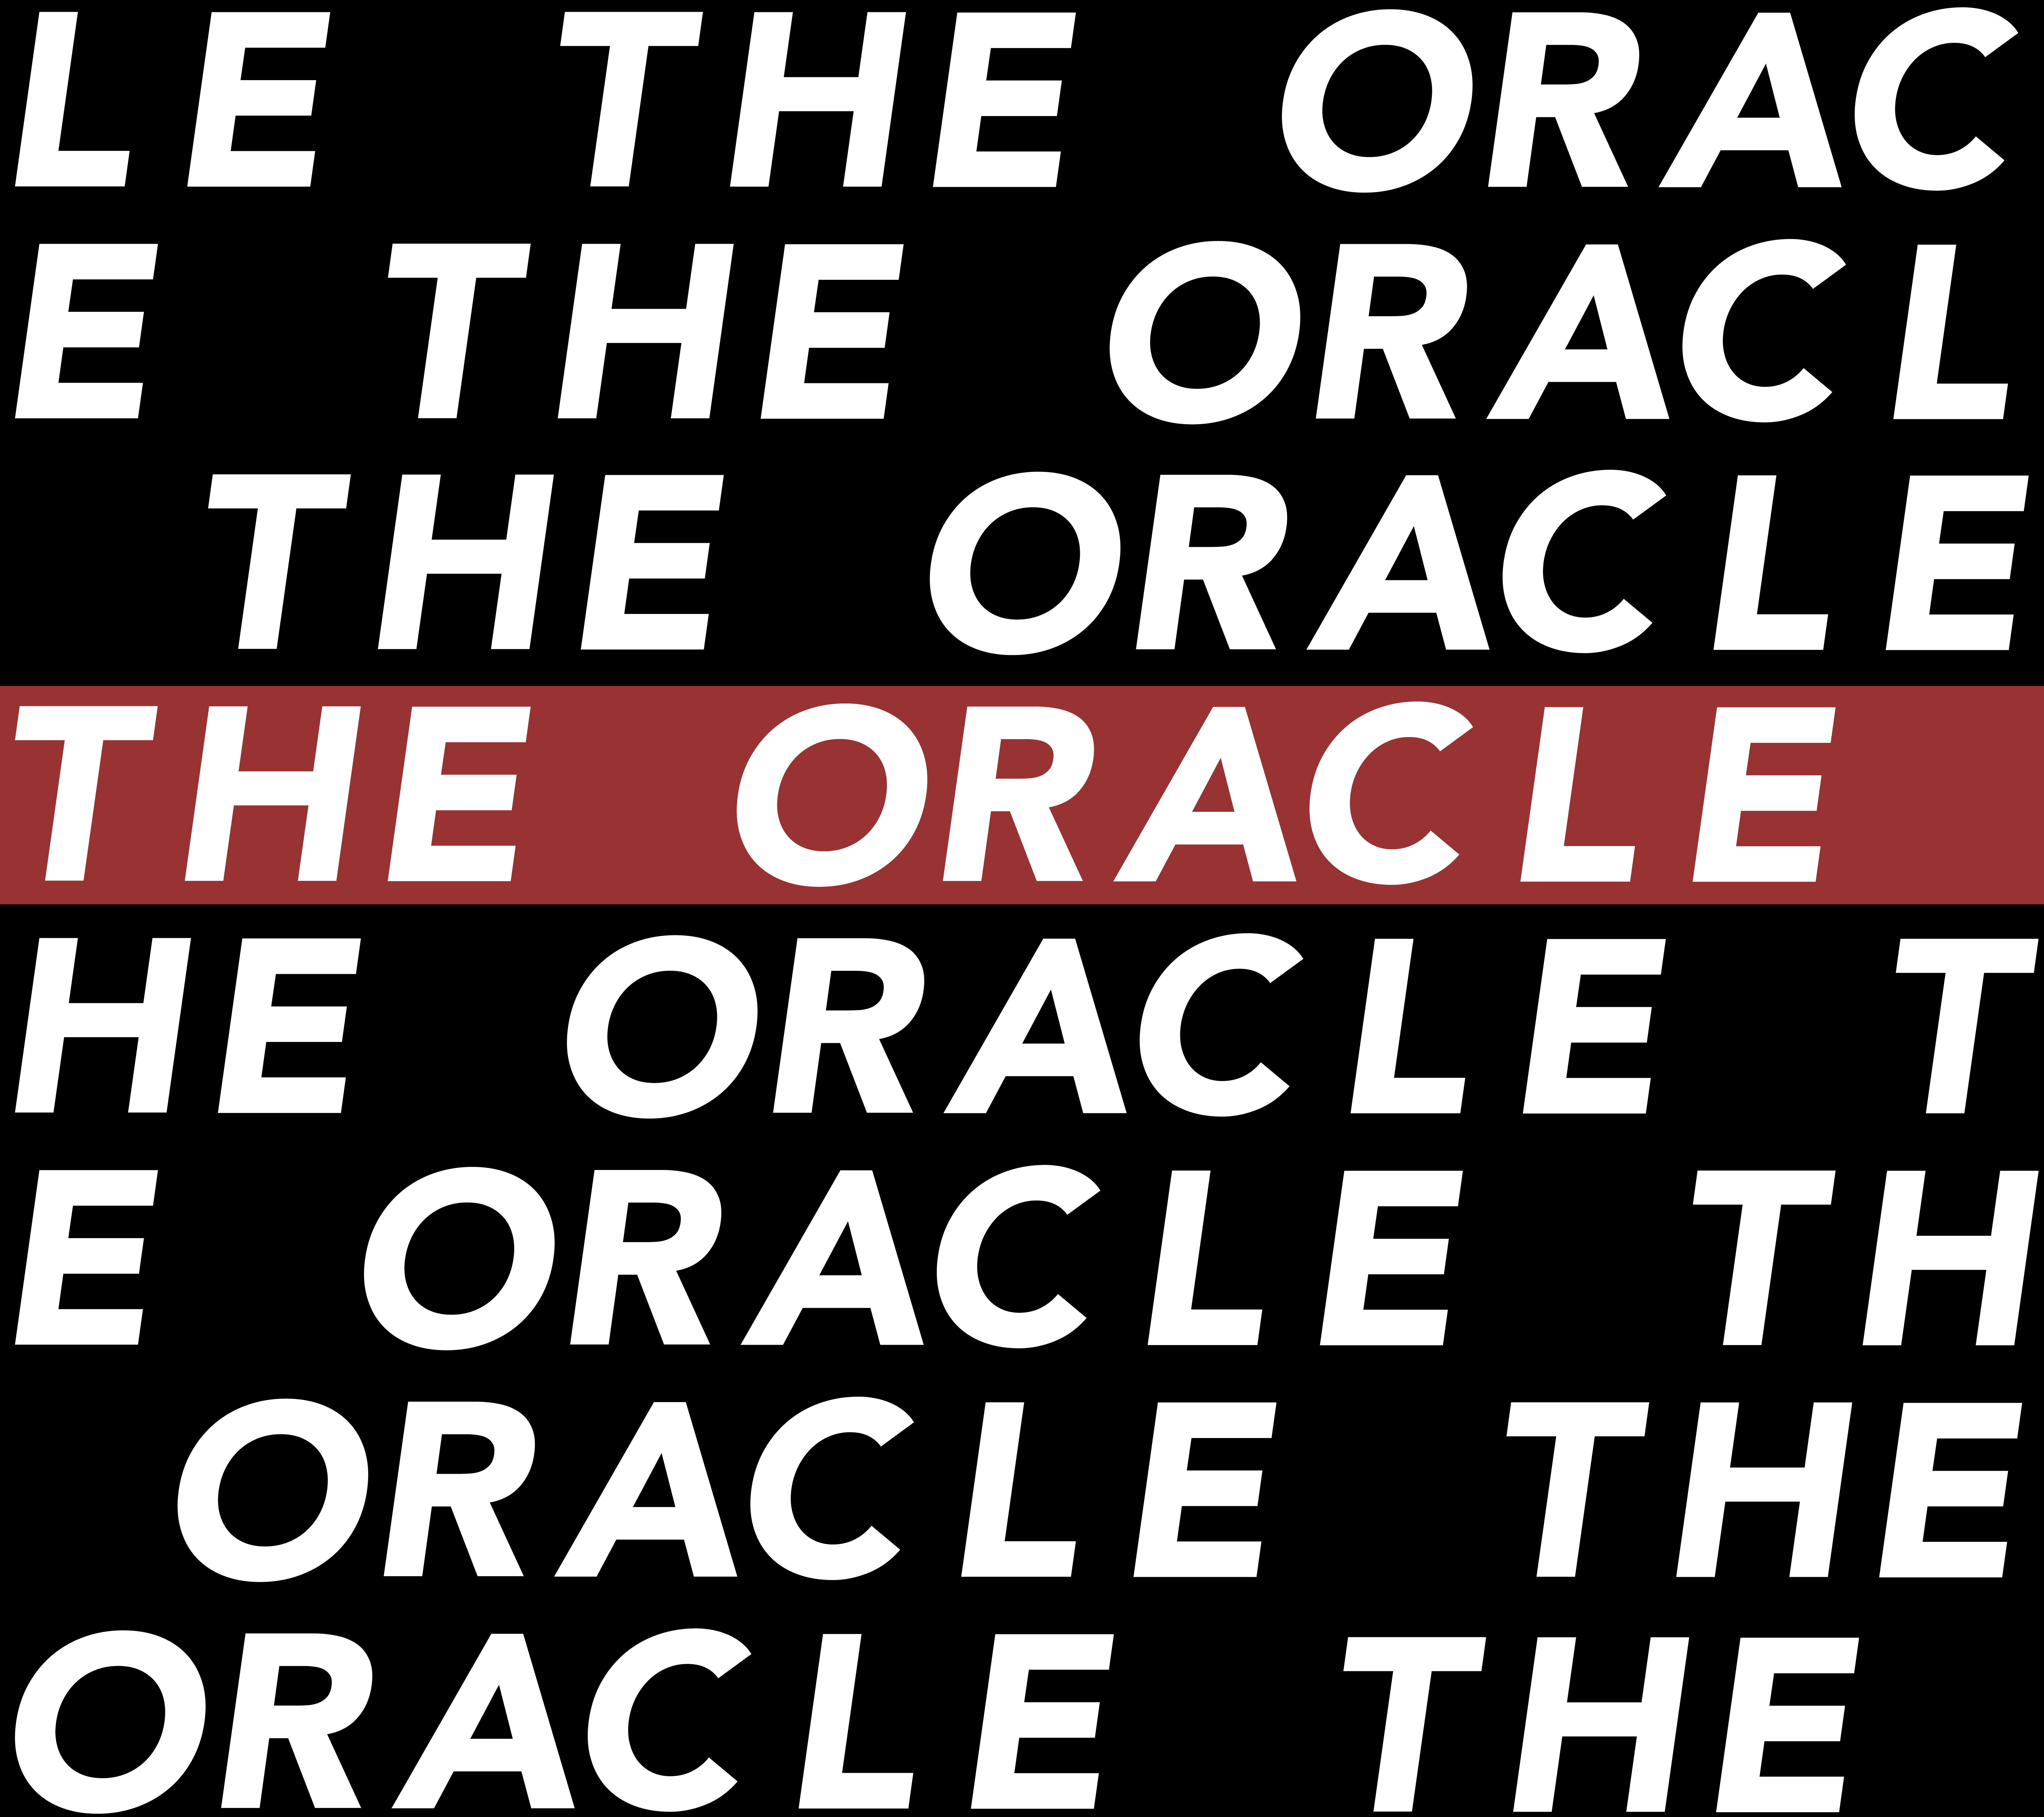 An Imposter Among Us – The Oracle